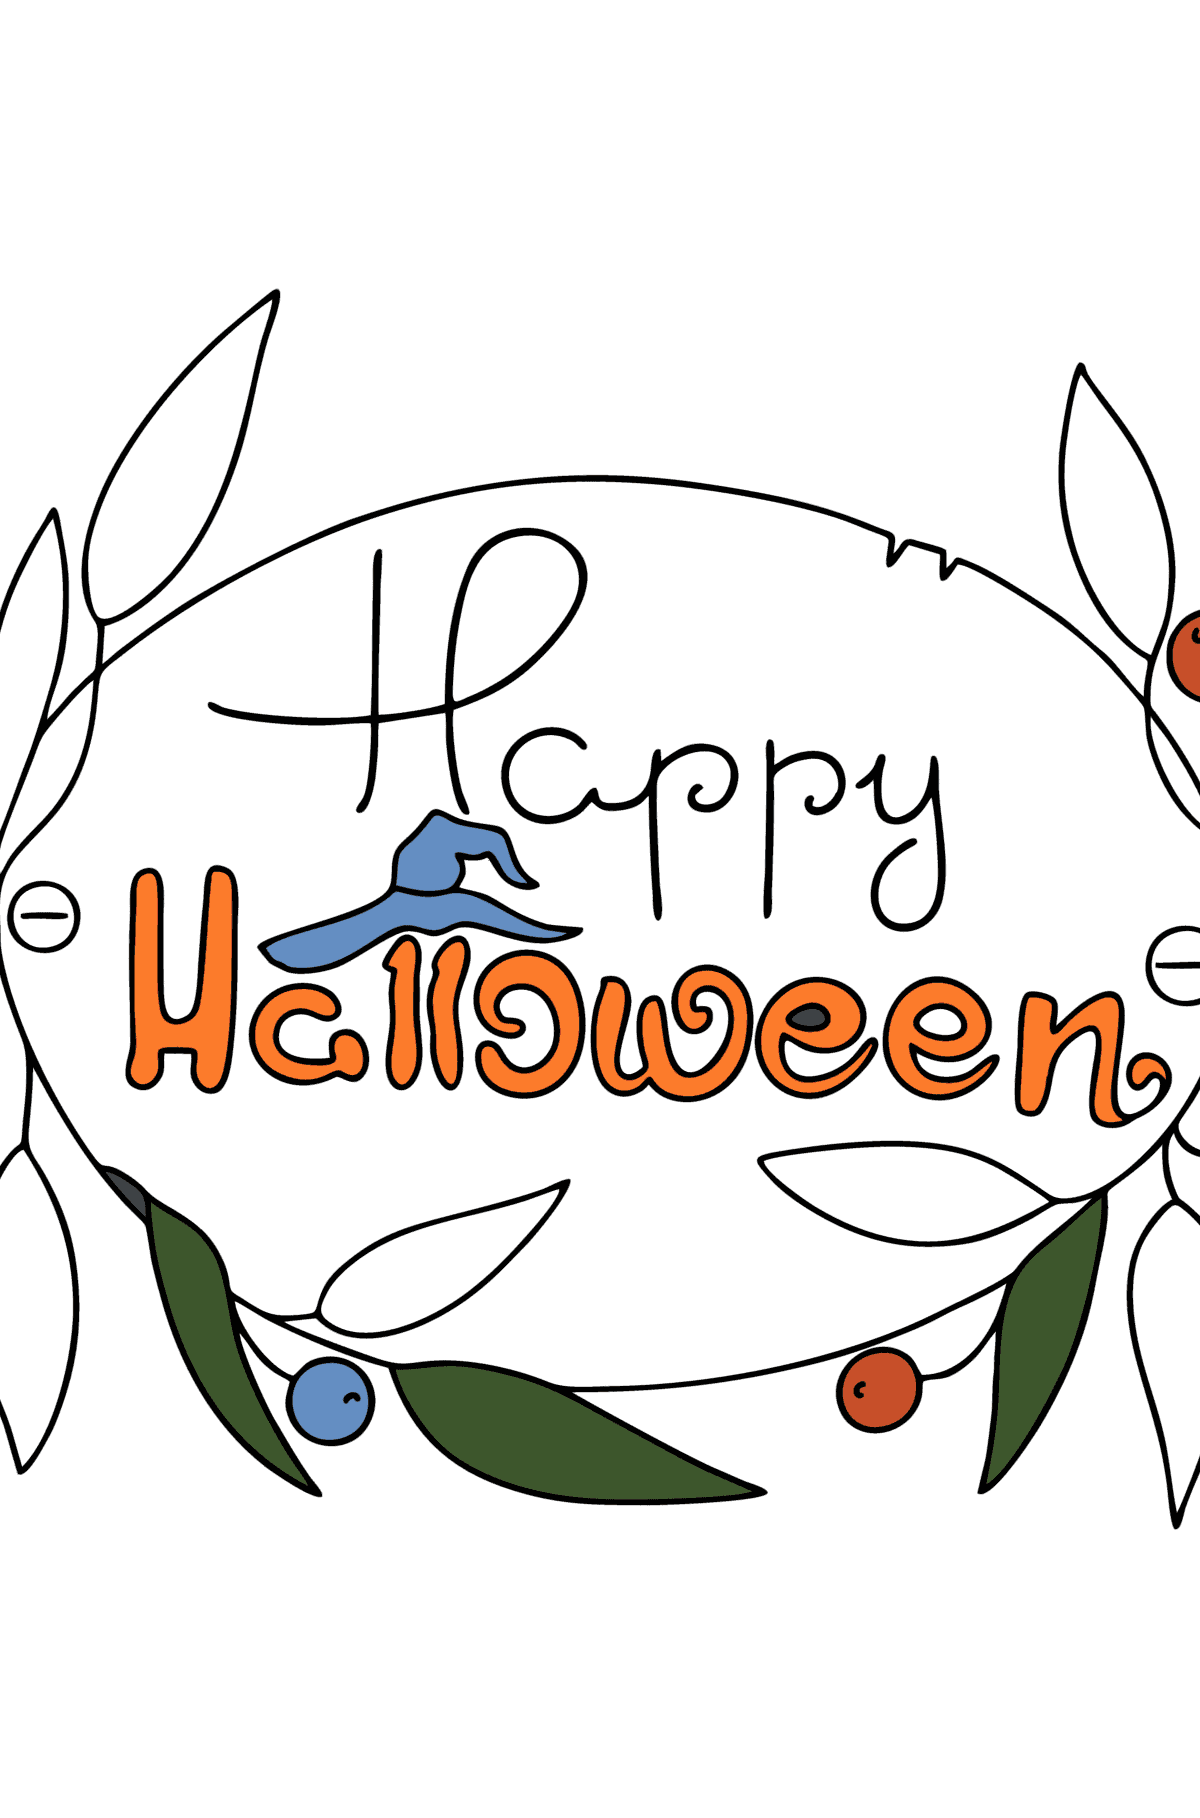 Halloween lettering сoloring page - Coloring Pages for Kids